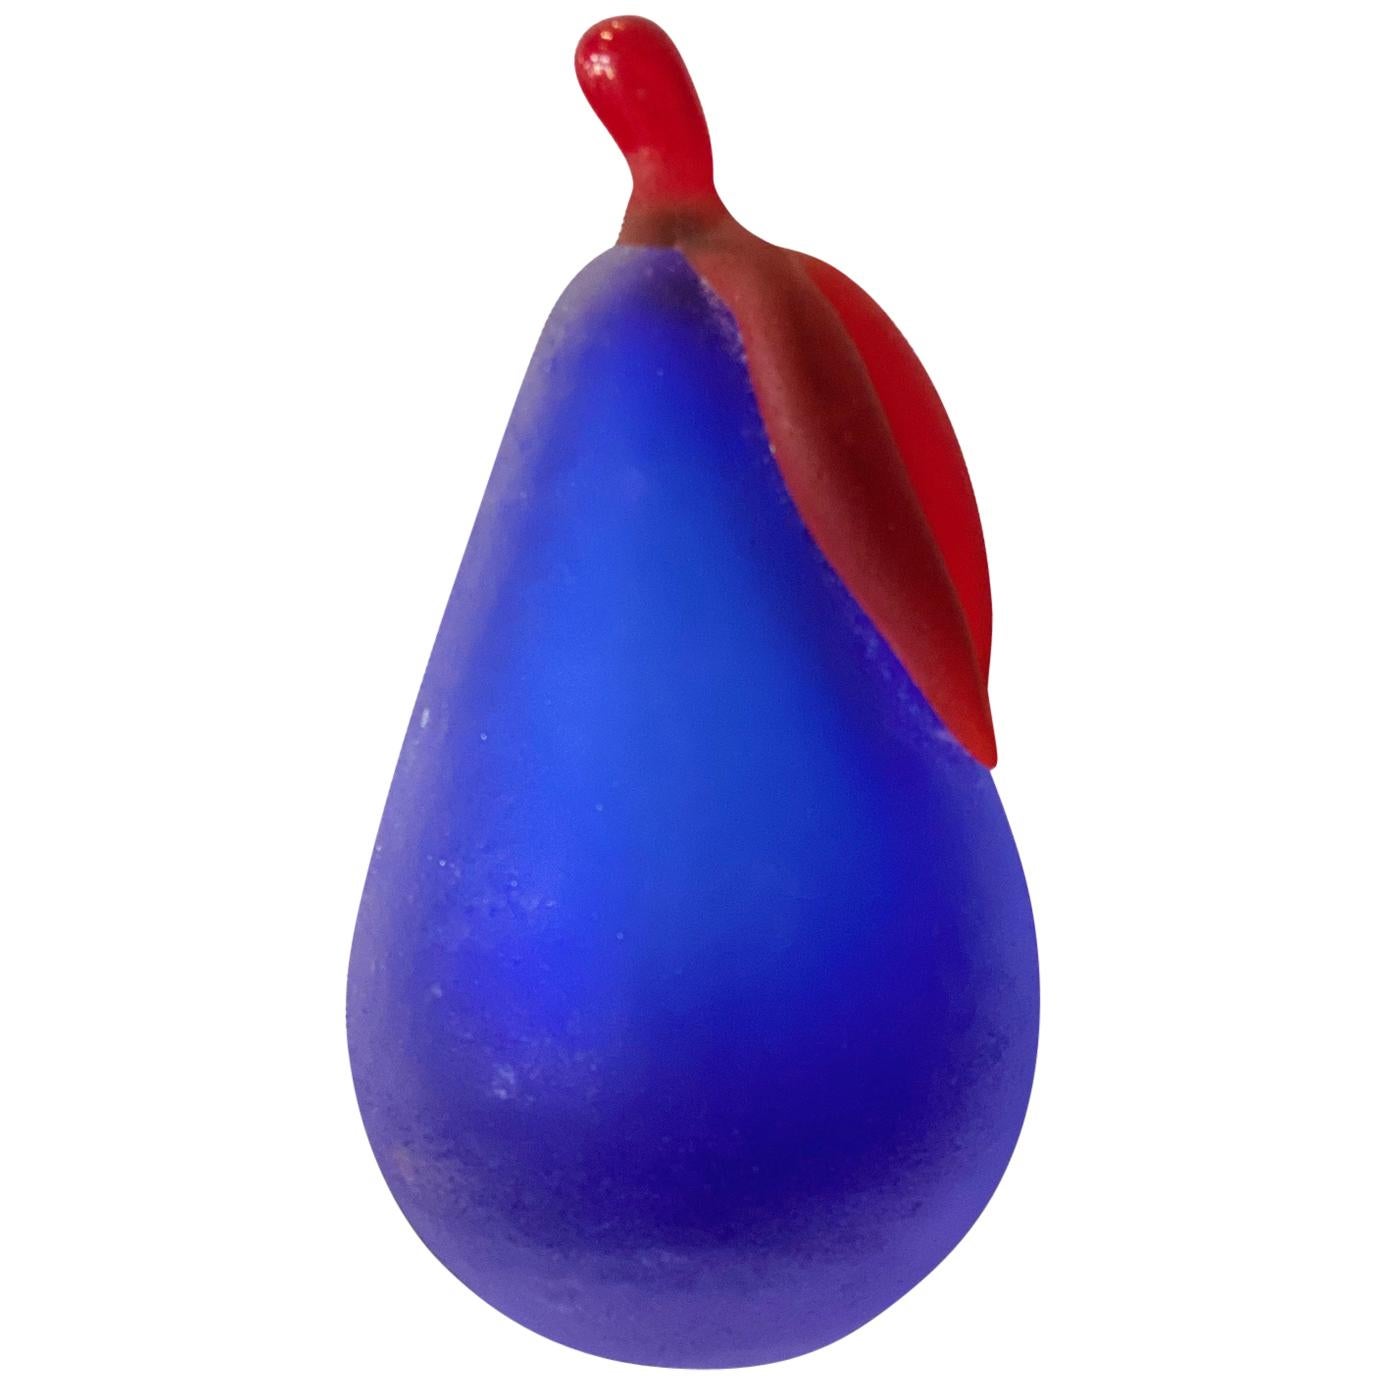 Murano Glass Fruit Pear by Franco Moretti, Italy, 1980s